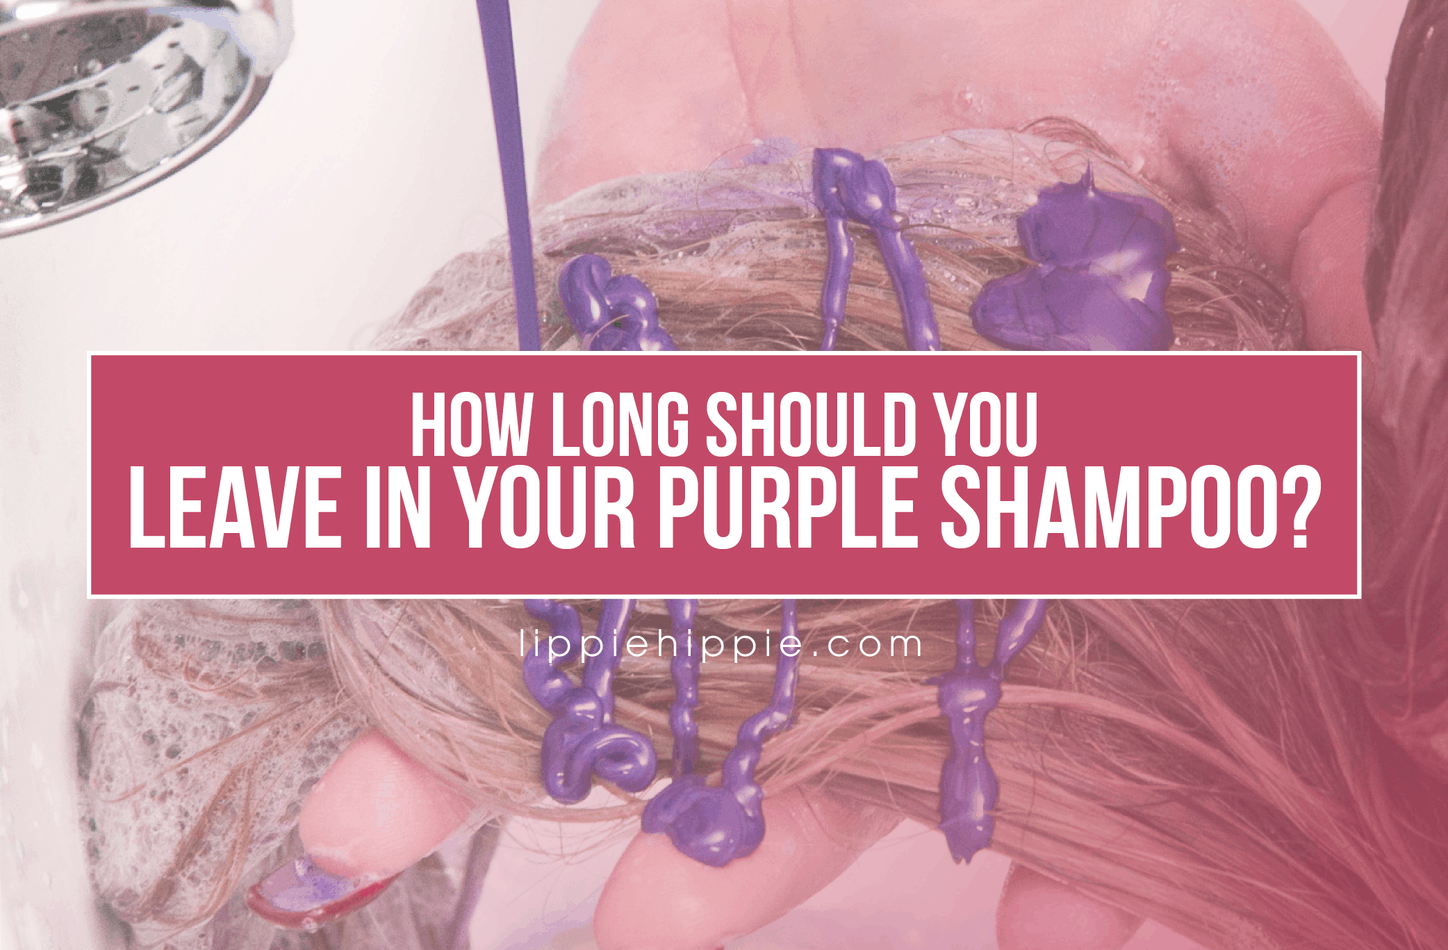 How Long Should You Leave In Your Purple Shampoo? How To Get Purple Shampoo Stain Out Of Shower